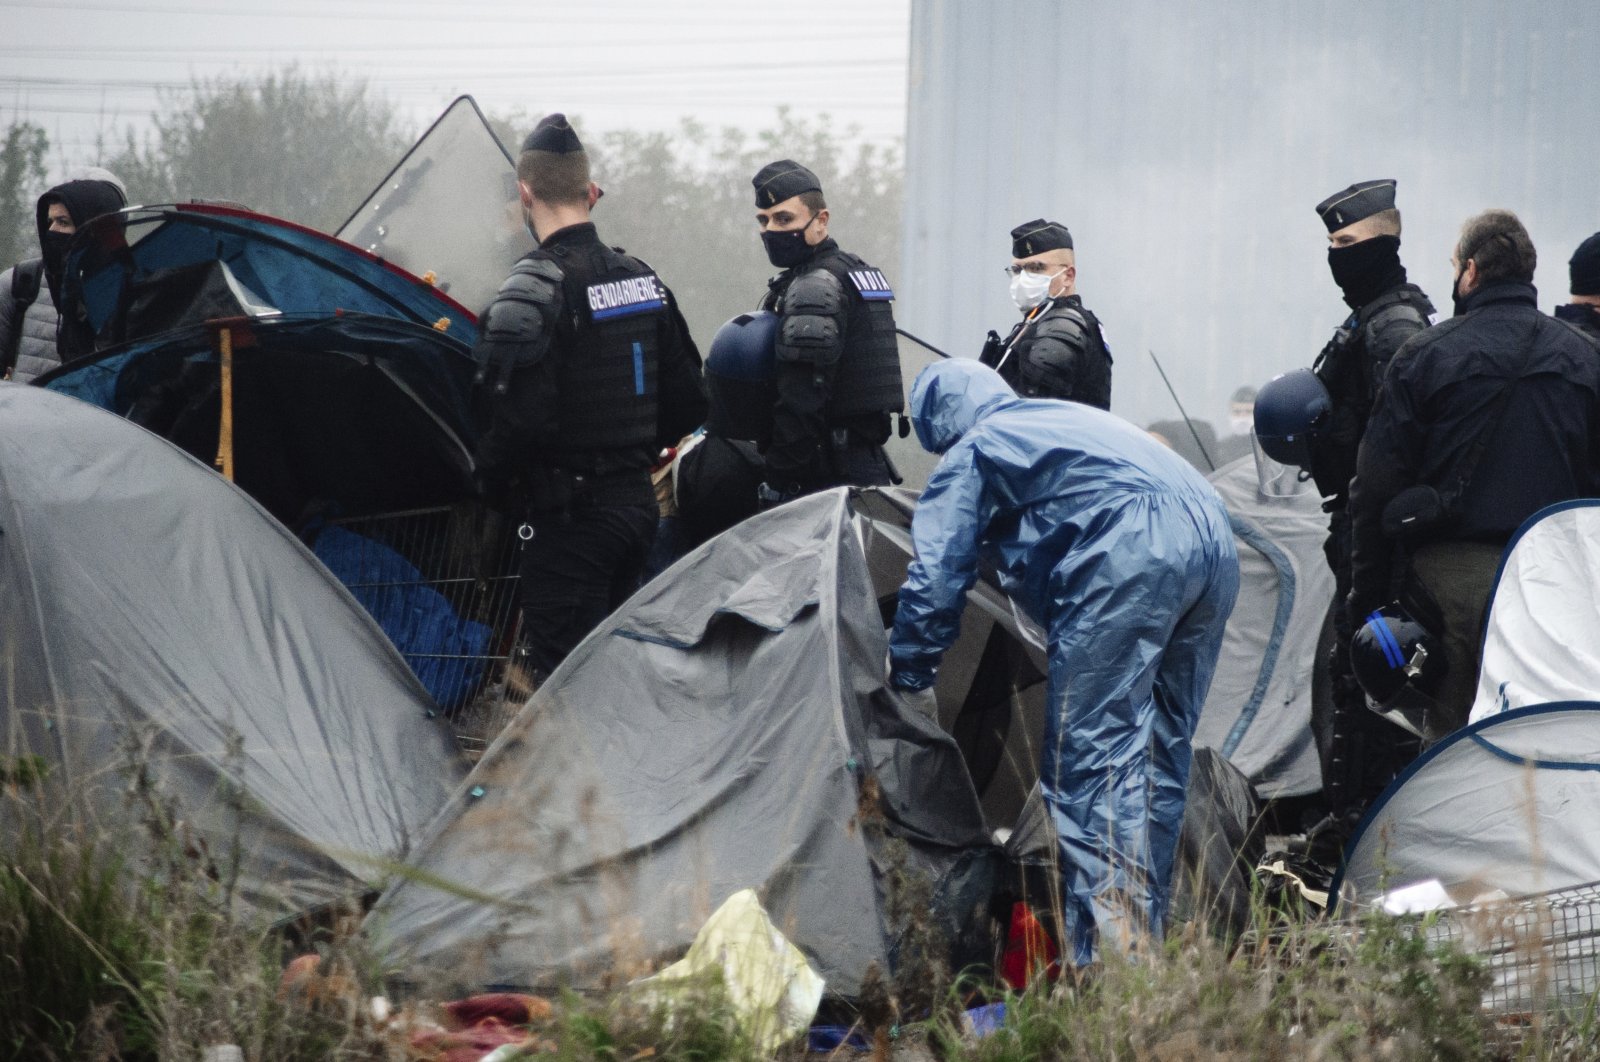 Police forces open tents as migrants are evacuated from a camp in Grande-Synthe, Northern France, Nov. 16, 2021. (AP Photo)